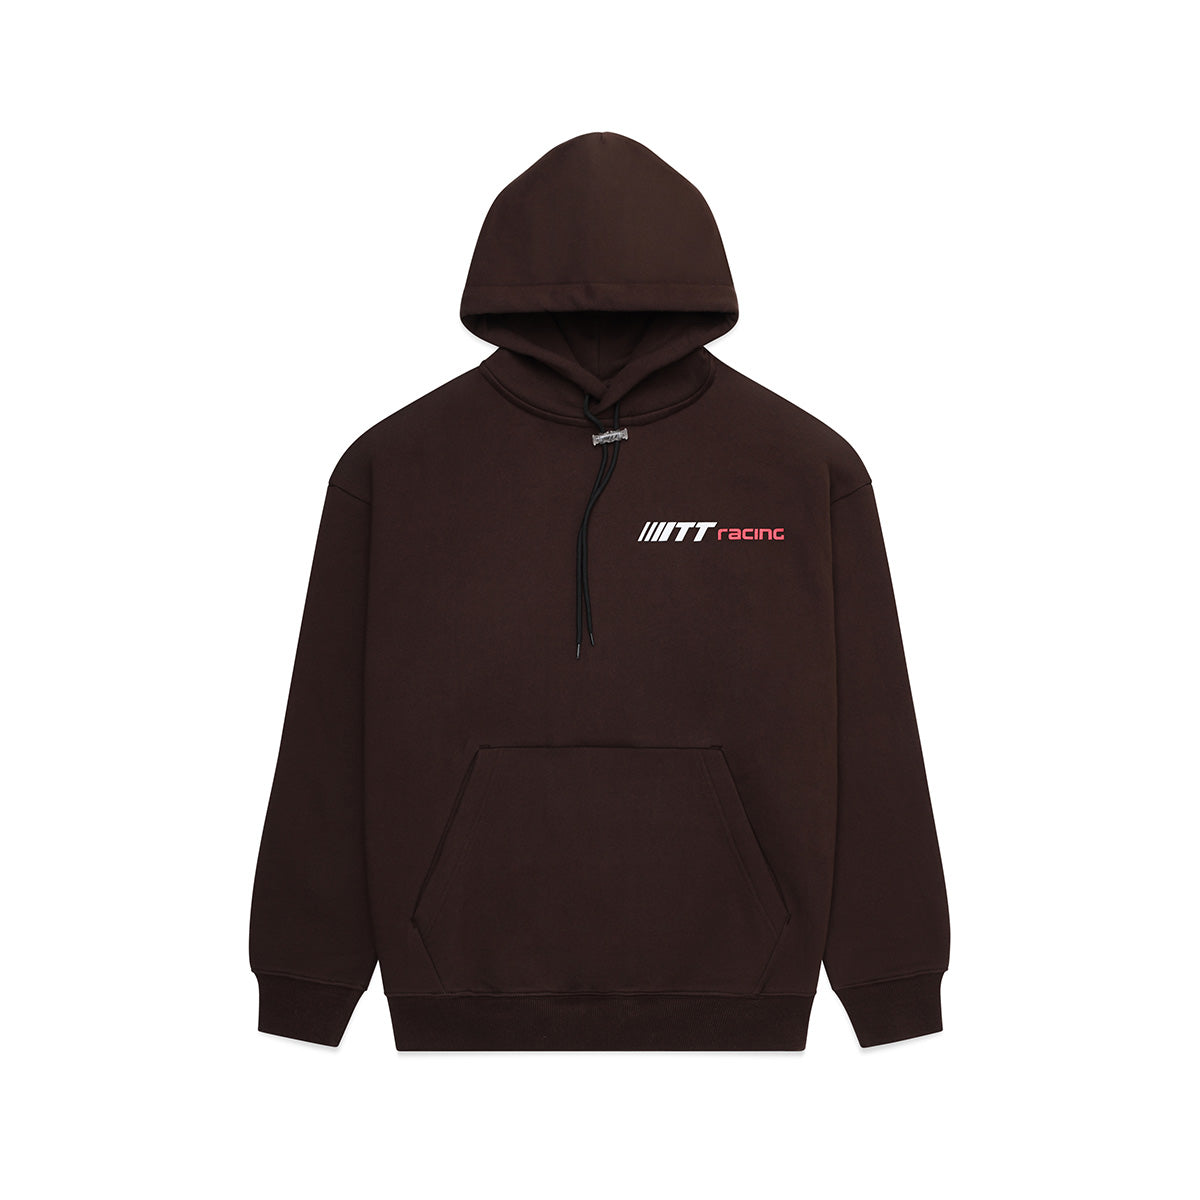 Dark brown Calsonic Capsule graphic hoodie featuring the Turbo Threads logo